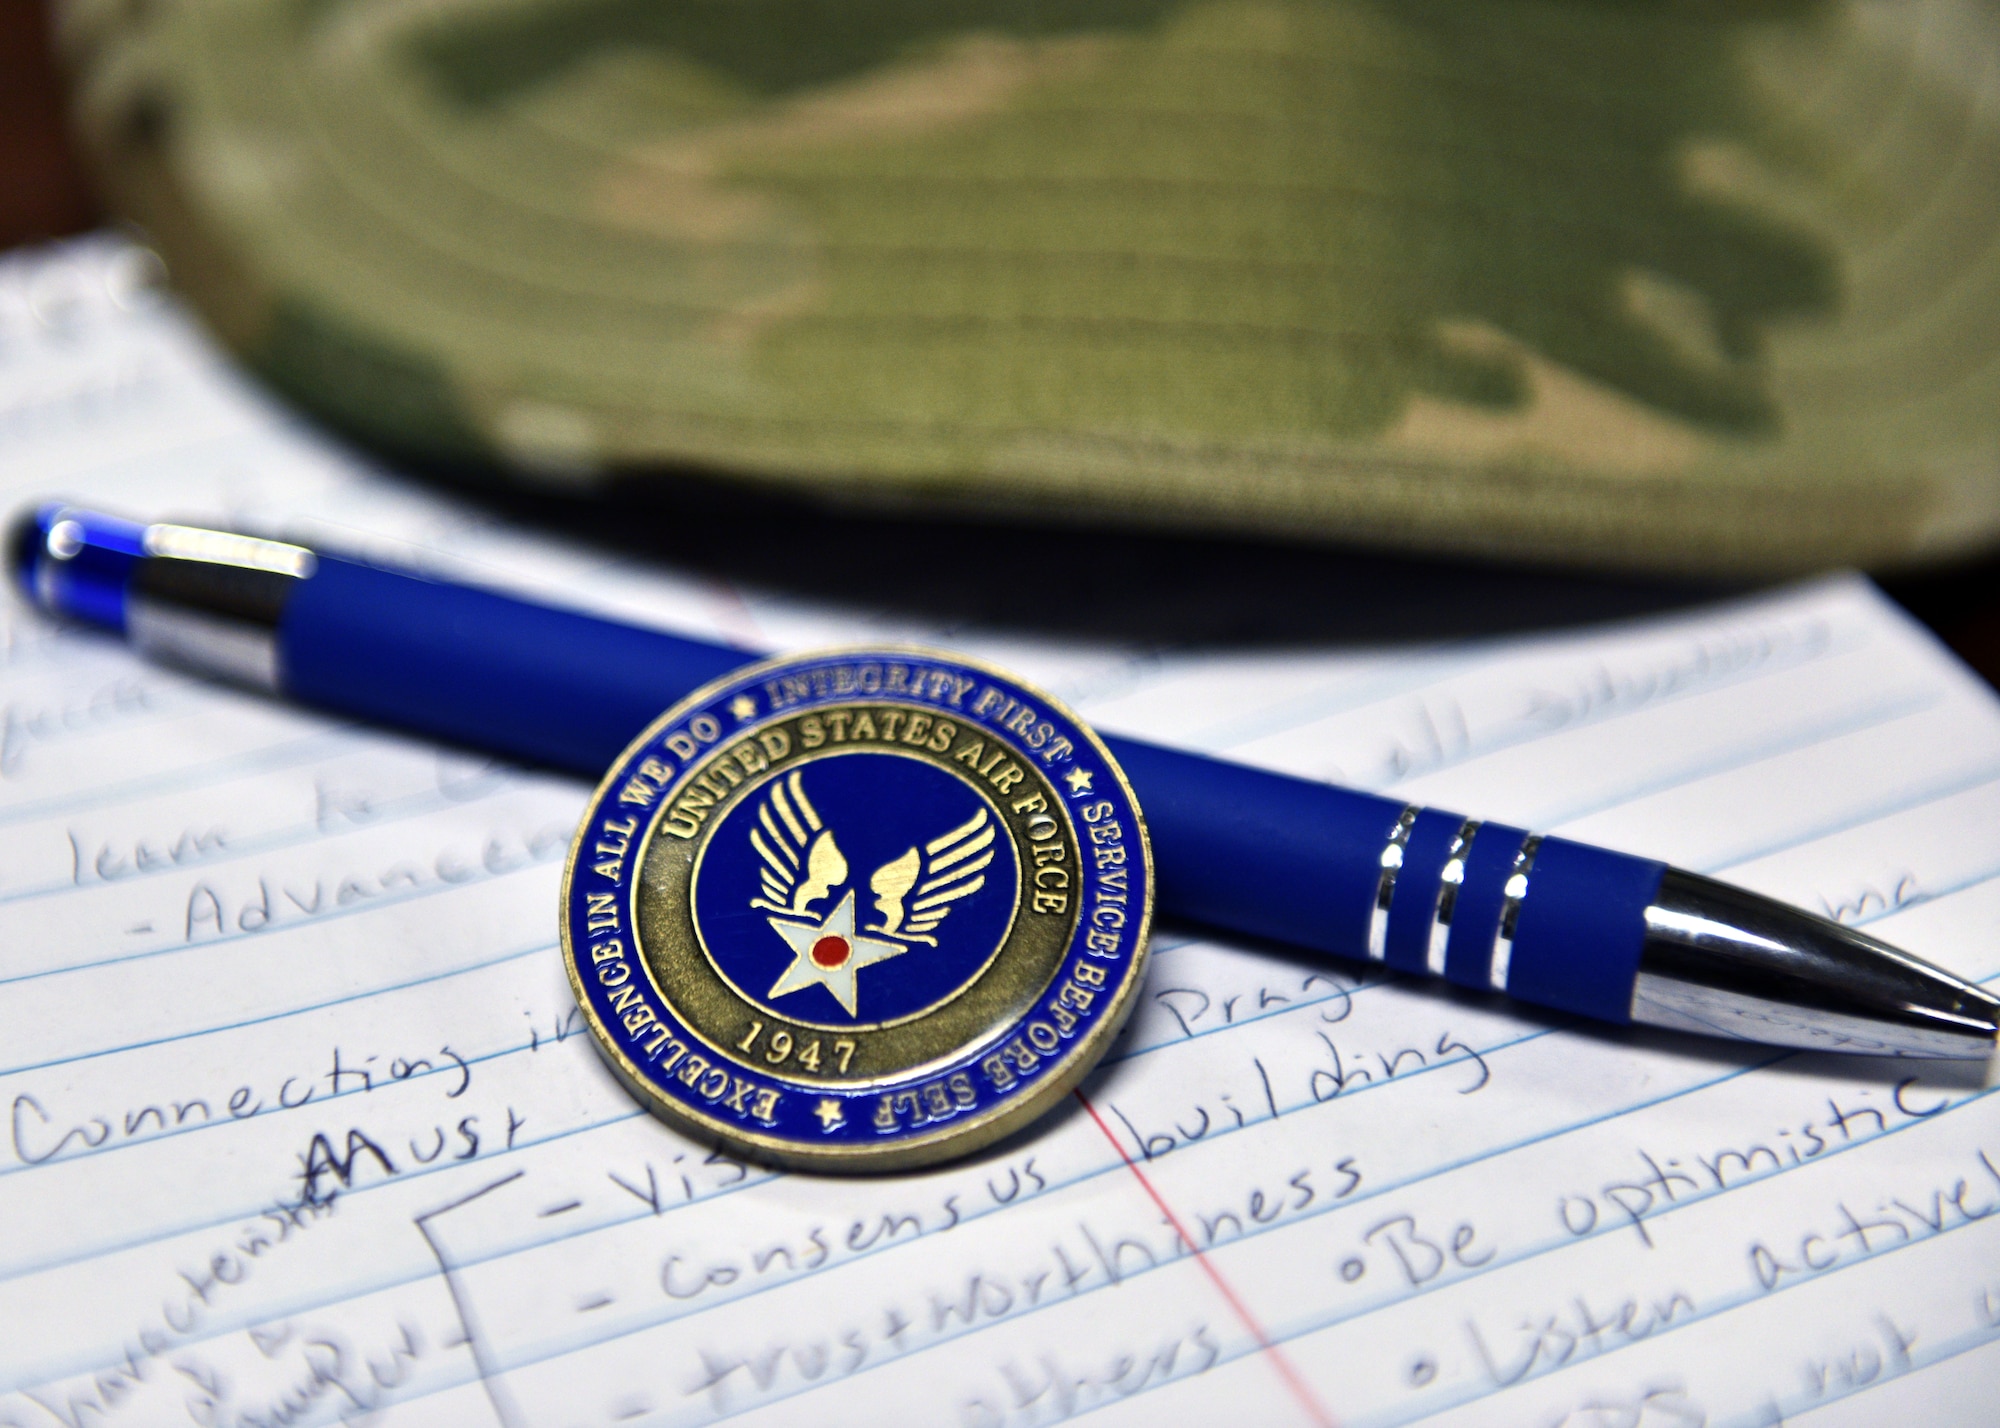 The Airman’s coin is a tradition in recognition of taking the first step to becoming a leader in the U.S. Air Force. Following Basic Military Training, Airmen are challenged to take on leadership roles and become mentors to their peers. (U.S. Air Force photo by Airman 1st Class Robyn Hunsinger)